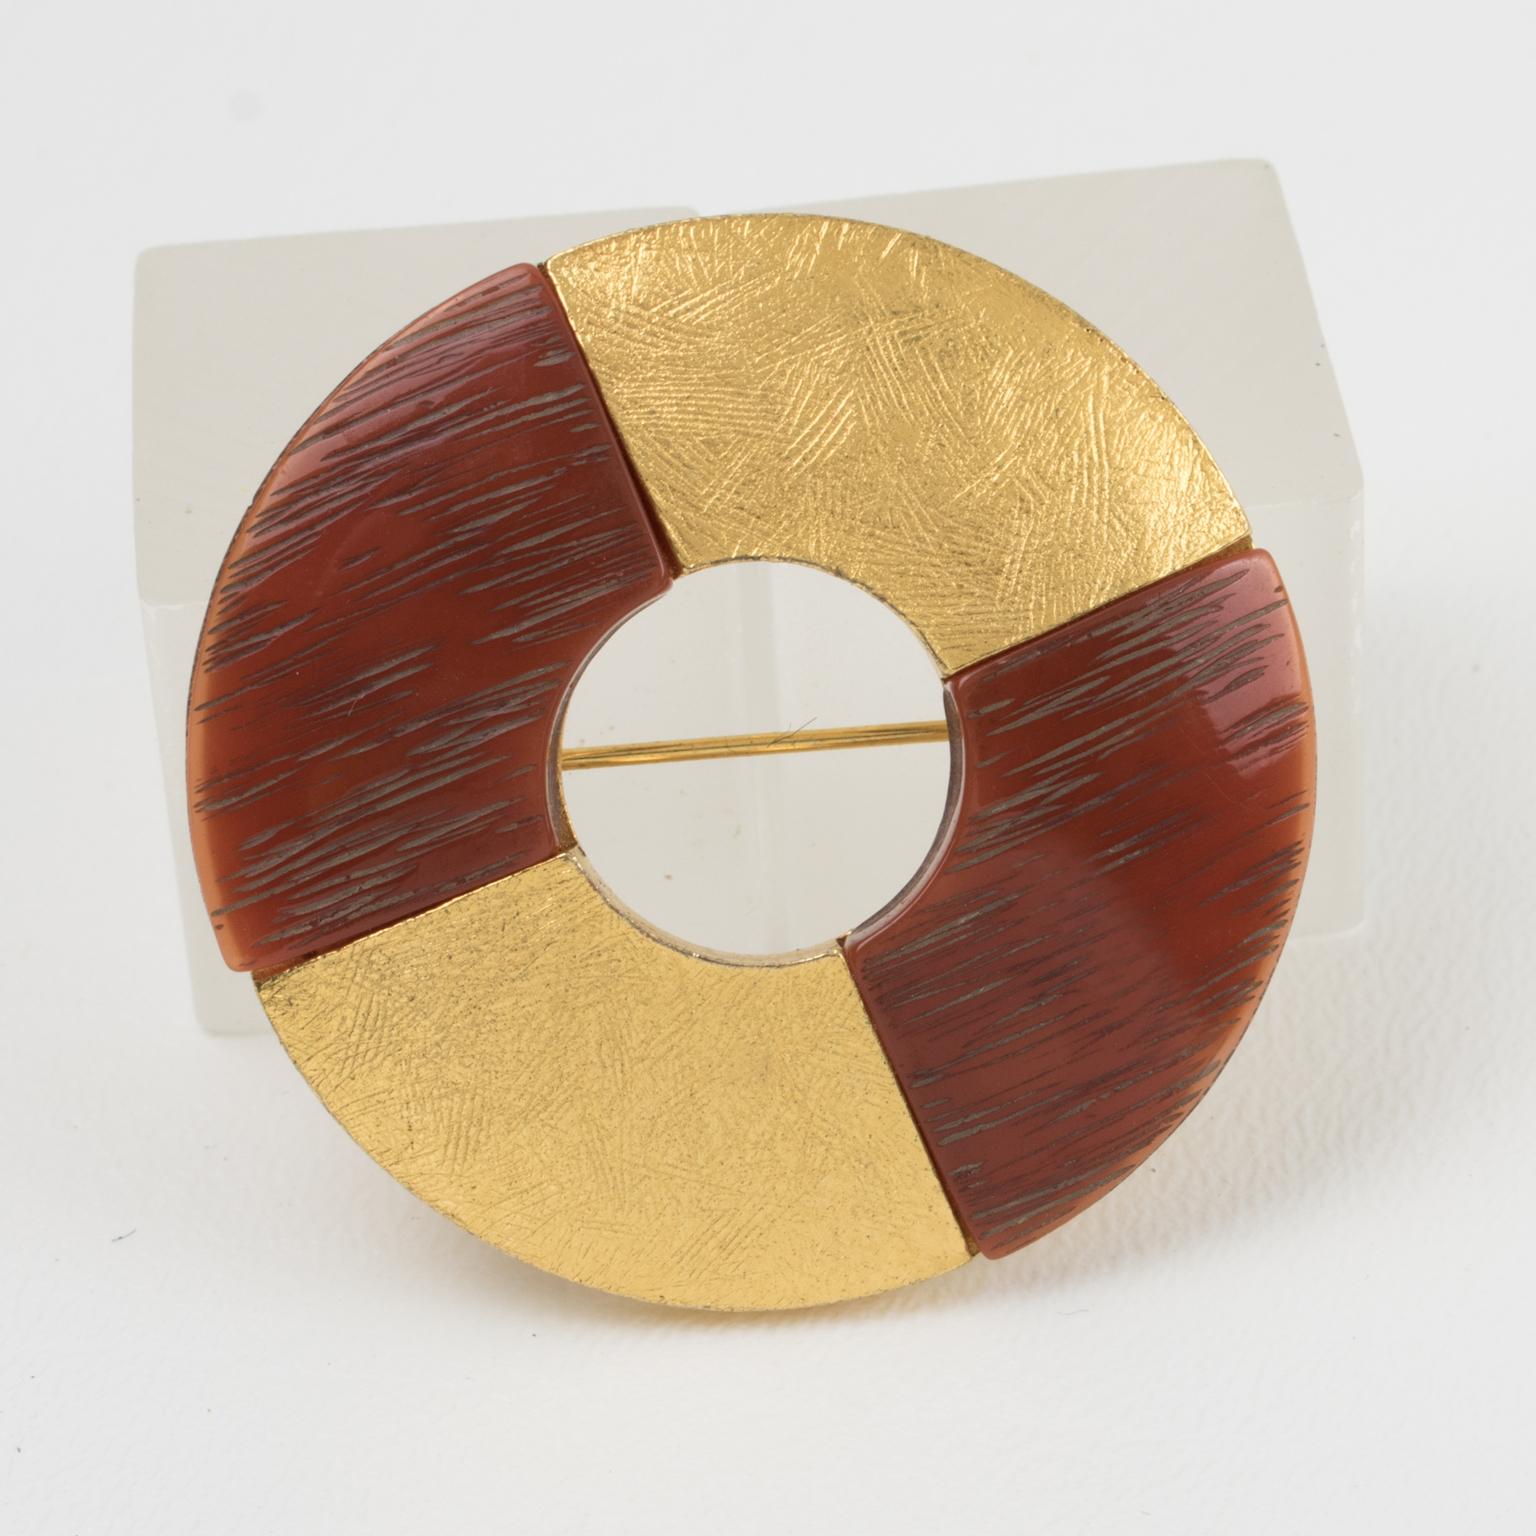 This lovely Yves Saint Laurent Paris signed pin brooch features a dimensional donut shape with textured gilt metal in a checkerboard pattern contrasted with rust resin elements with a texture imitating bone. The pin has a security closing clasp at